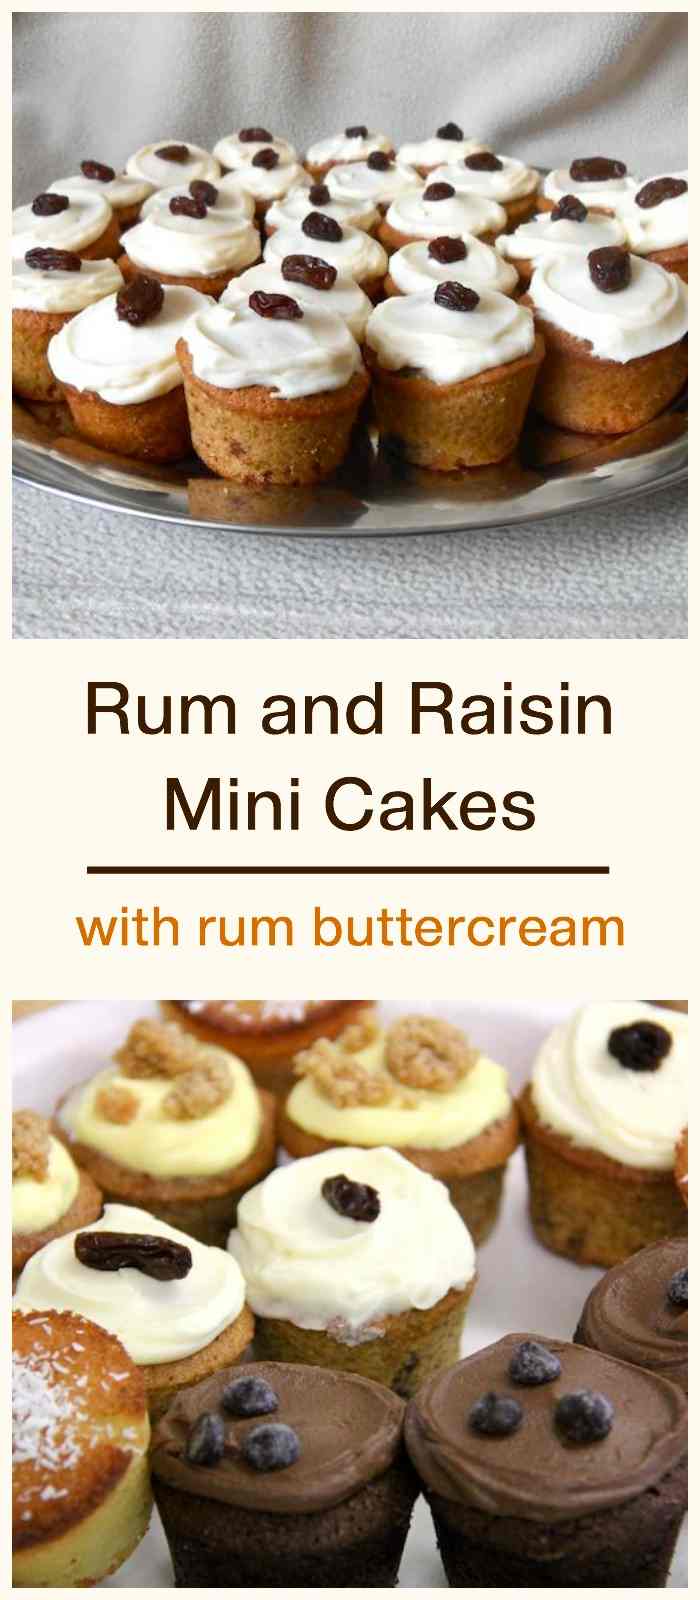 A tray of rum and raisin cupcakes.